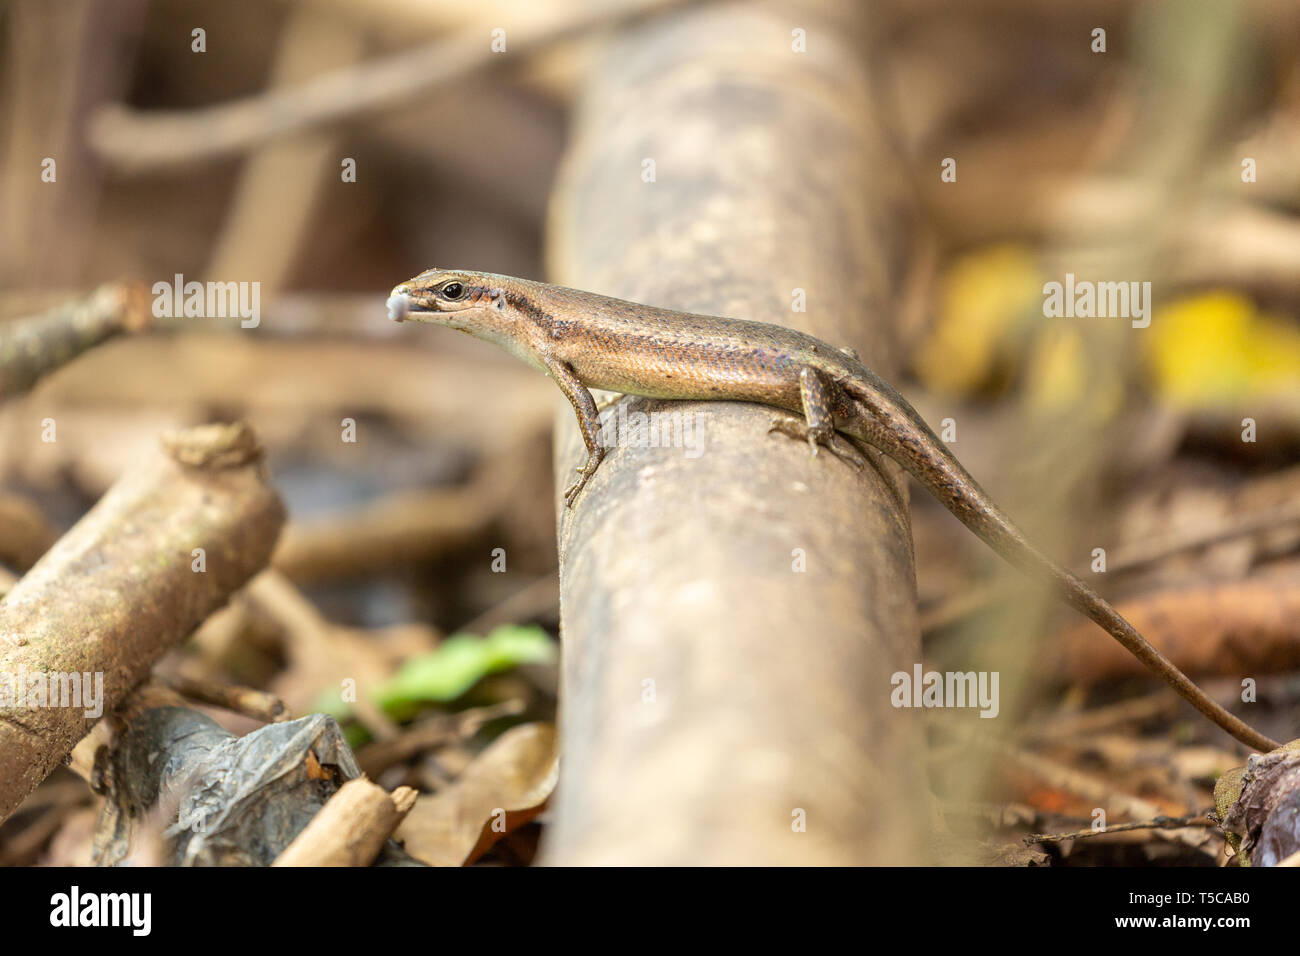 Lizard skink perched on a branch while sticking its tongue out, licking its lips Stock Photo